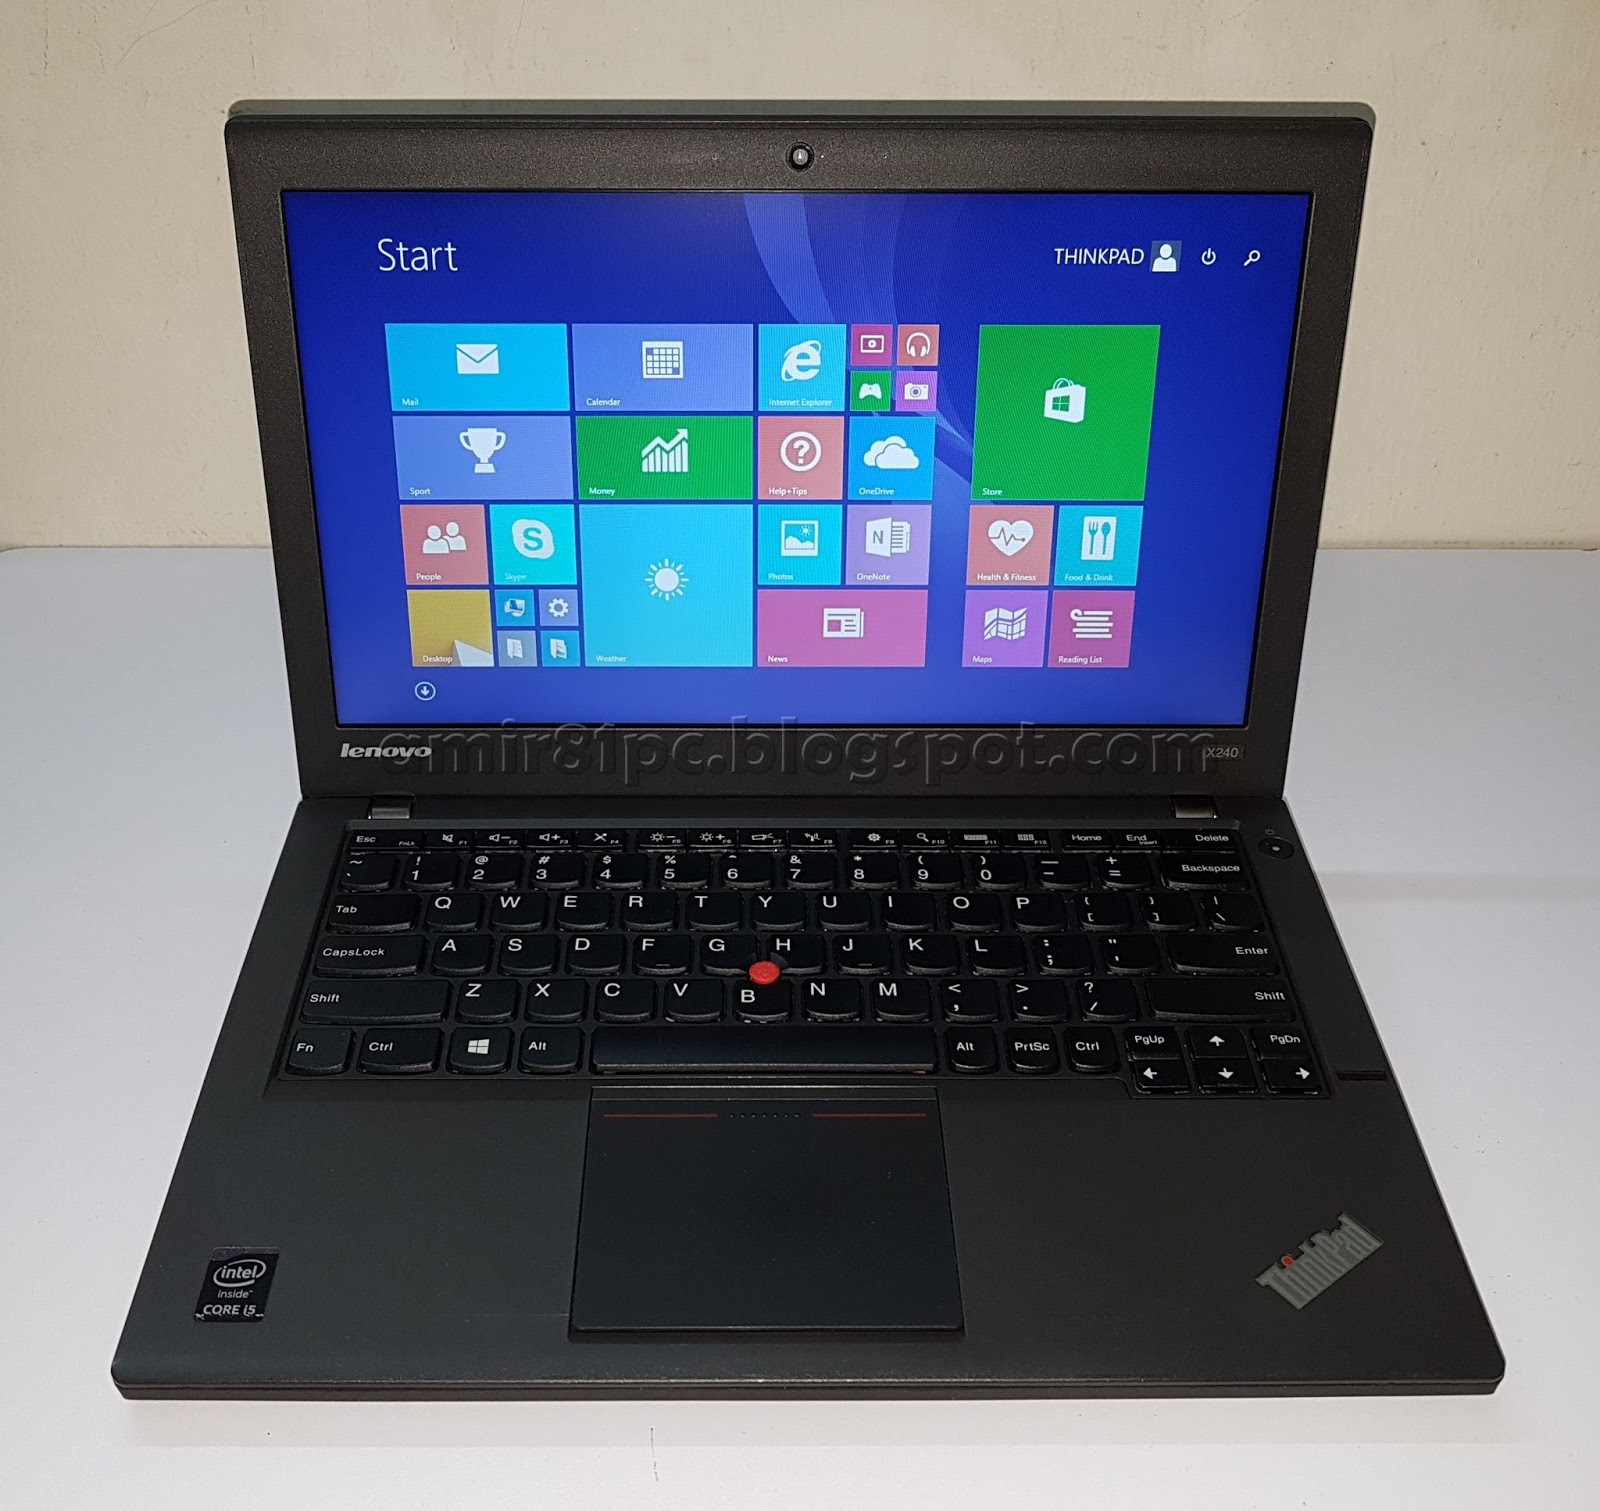 Three A Tech Computer Sales and Services: Used Laptop Lenovo Thinkpad